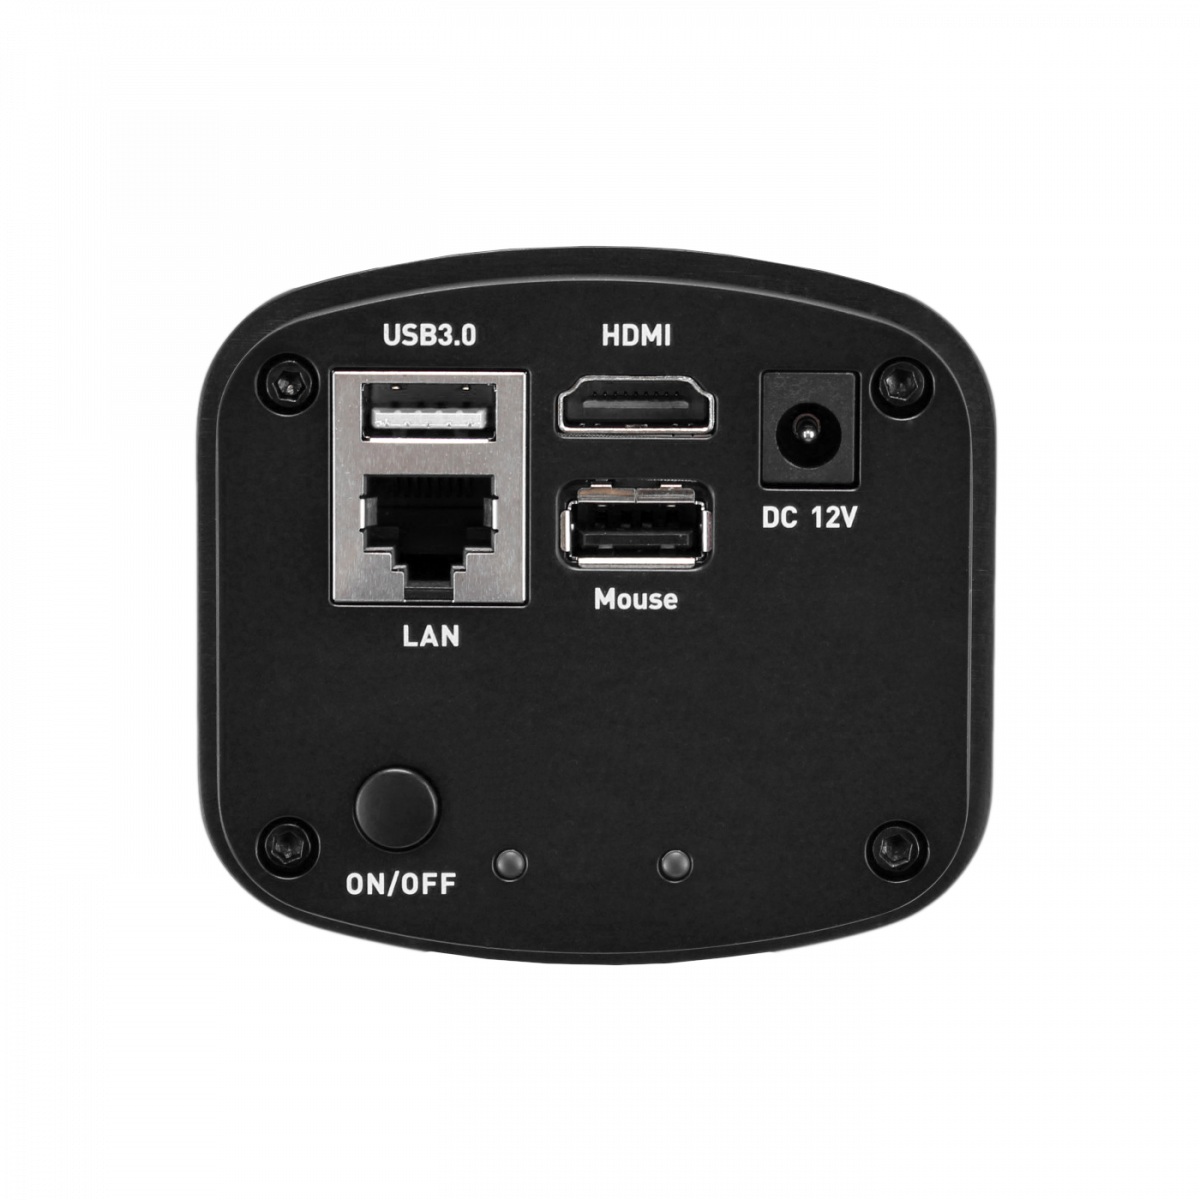 Excelis 4K camera, showing connection ports for HDMI, Ethernet, USB 3.0 and USB 2.0 (for mouse control)